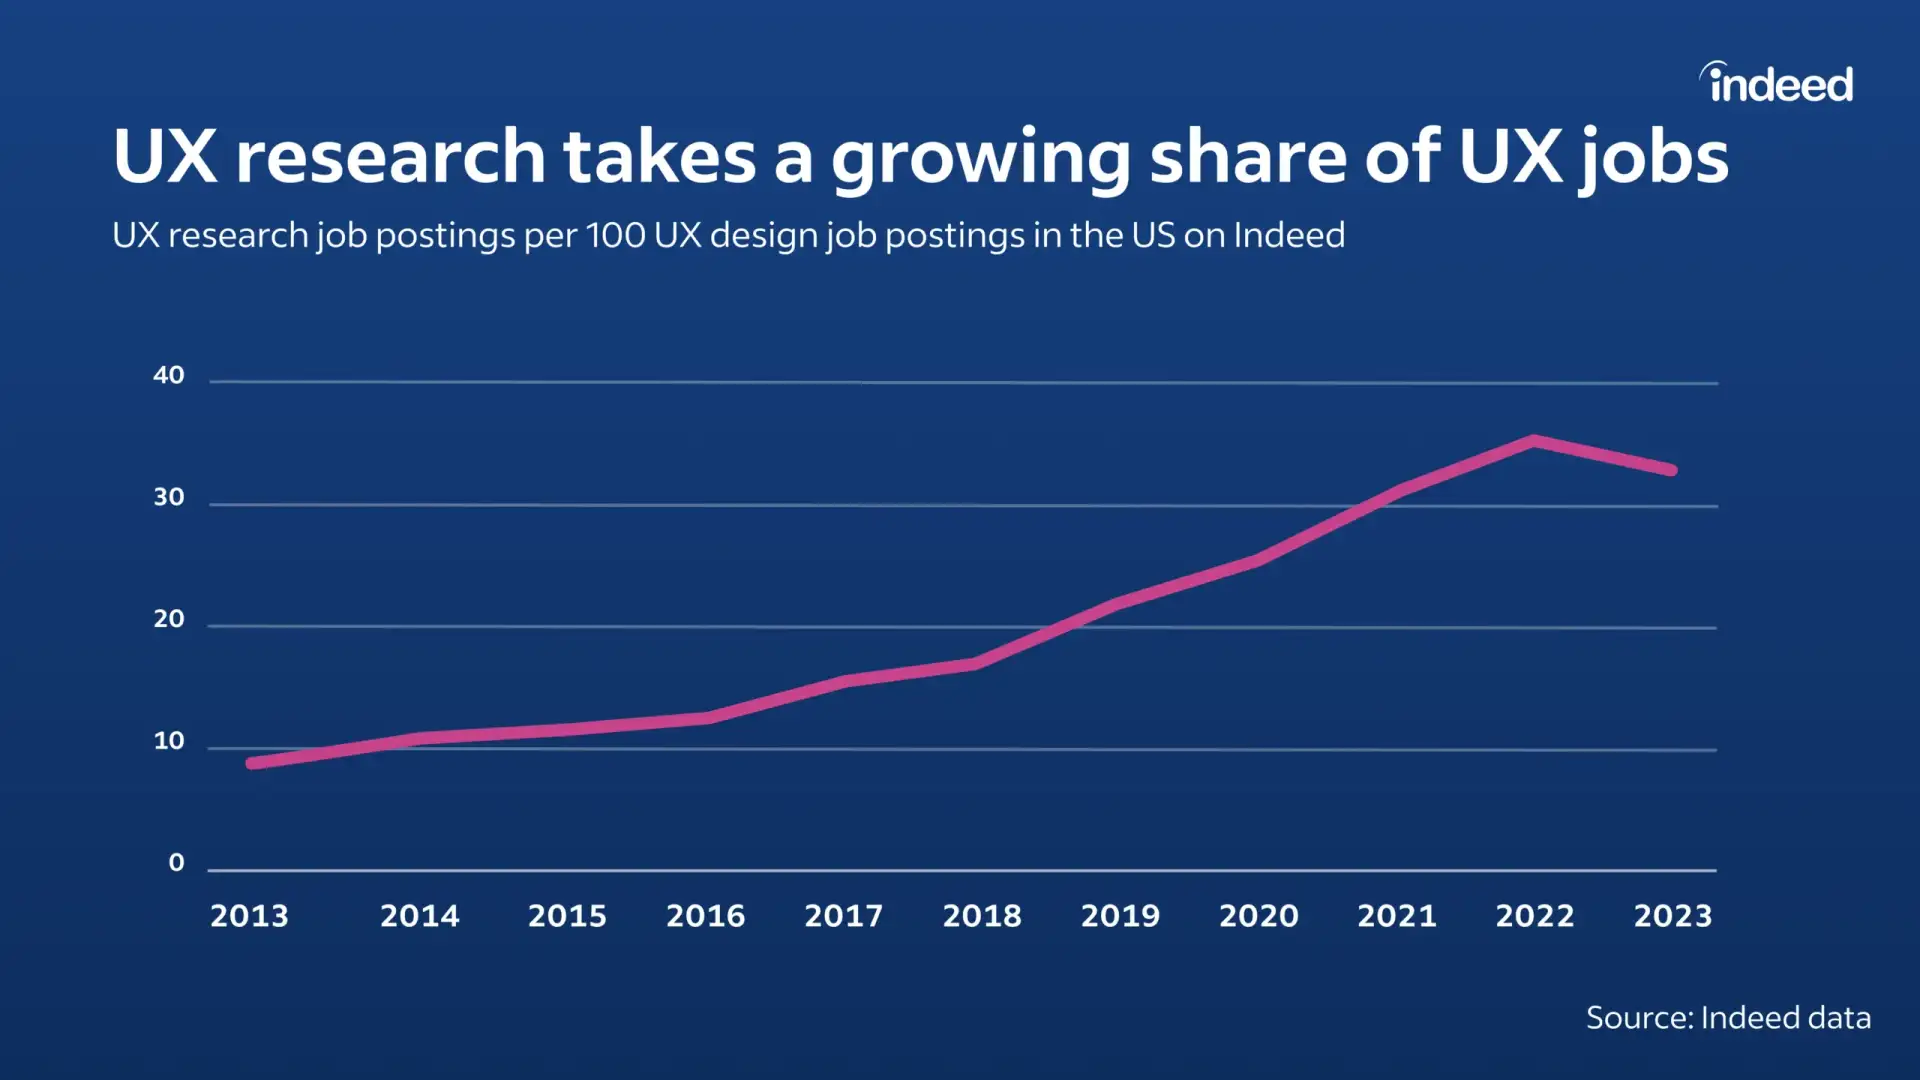 UX research jobs on Indeed grew from 8.9 per 100 UX design jobs in 2013 to 35.7 per 100 in 2022, dipped to 33.2 in 2023